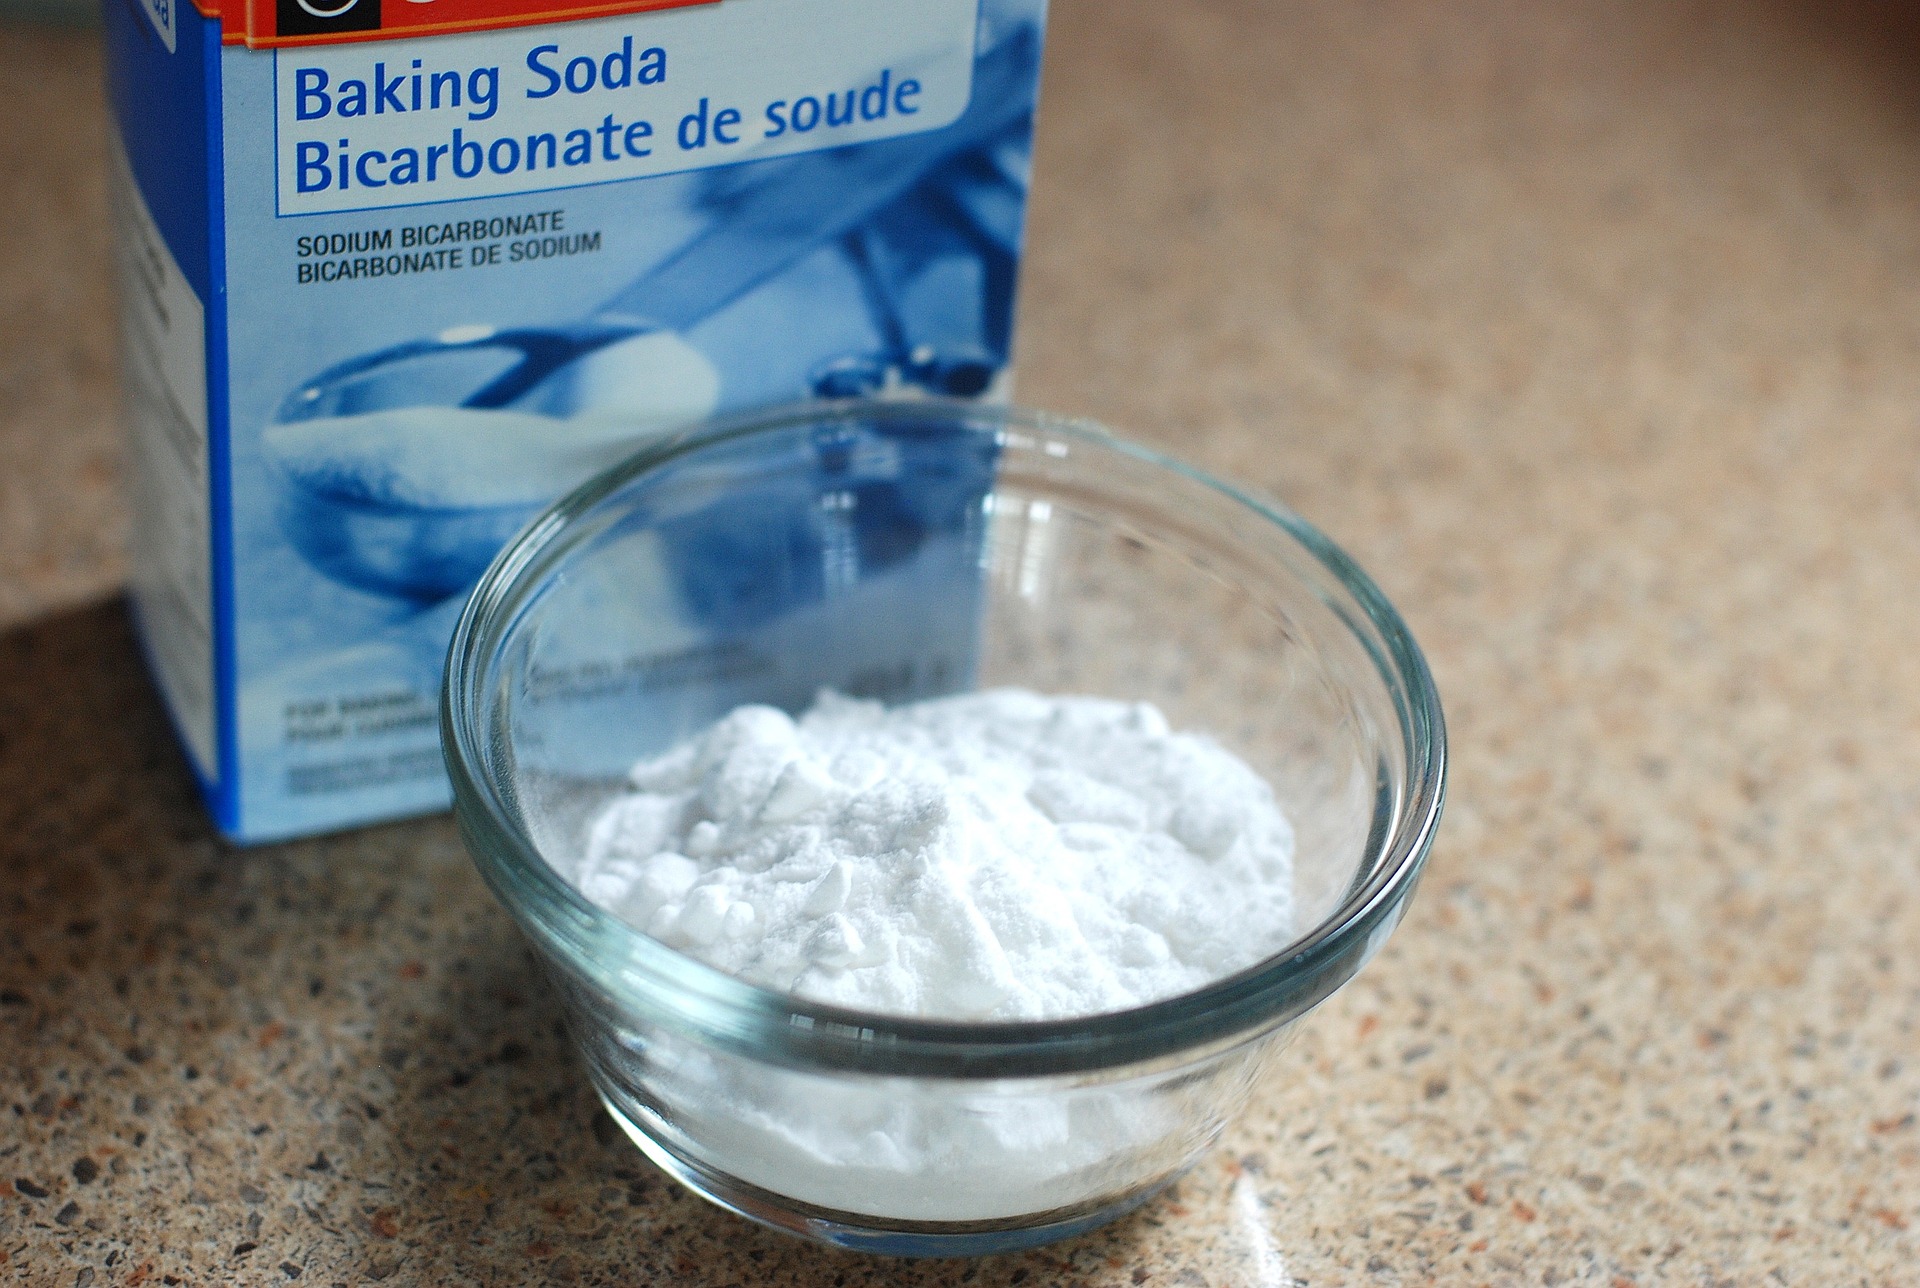 The possibilities and limits of baking soda